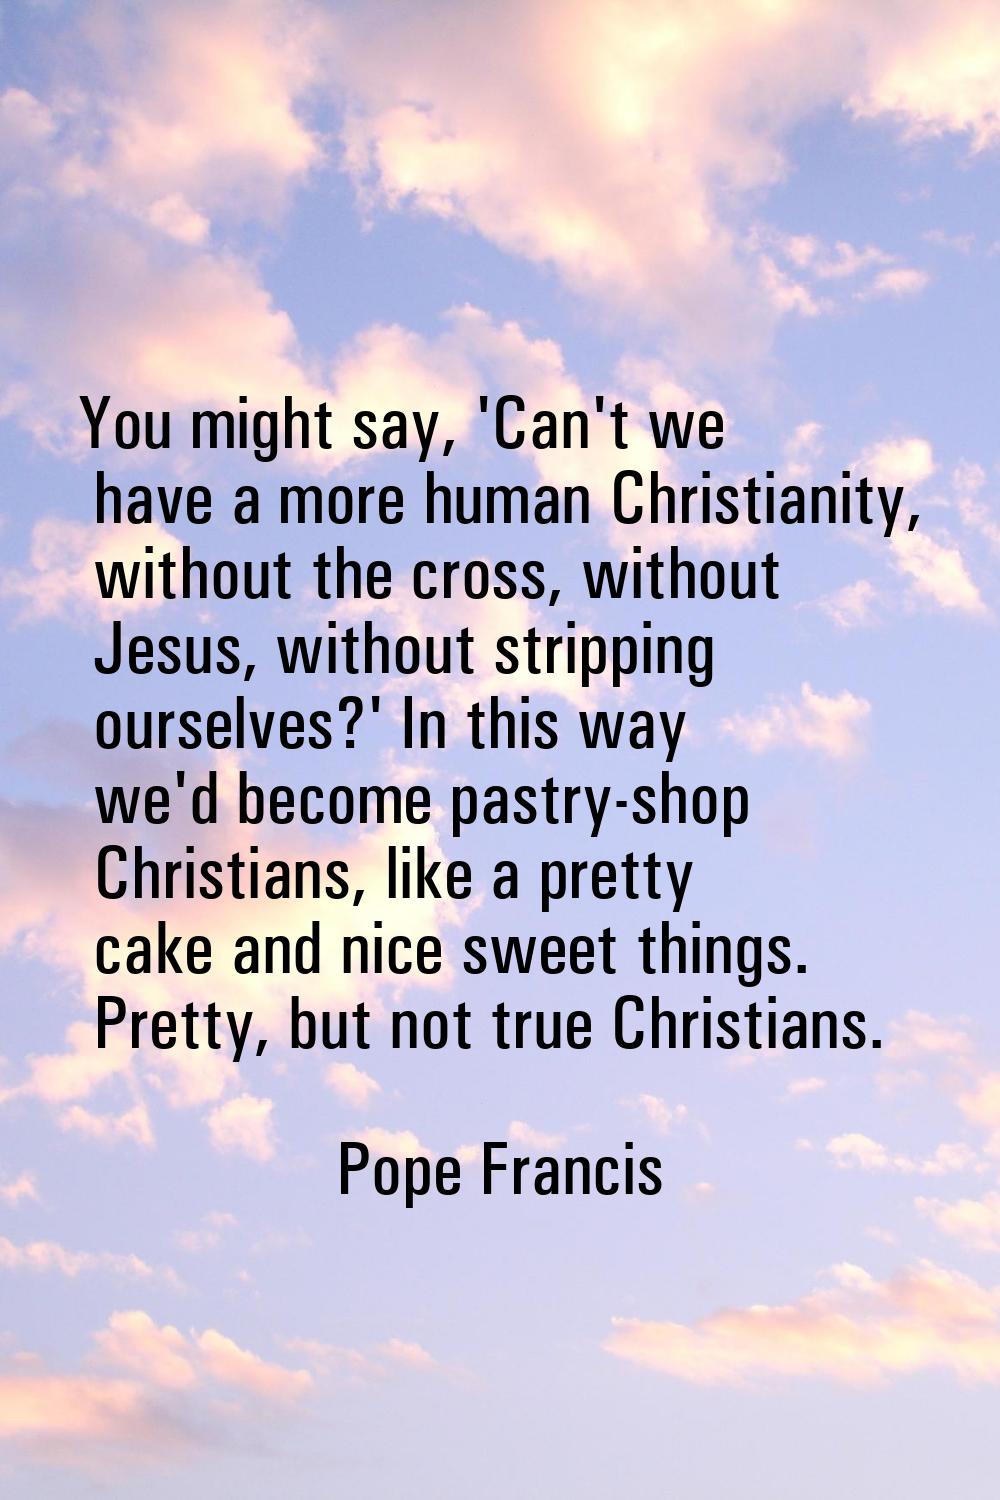 You might say, 'Can't we have a more human Christianity, without the cross, without Jesus, without 